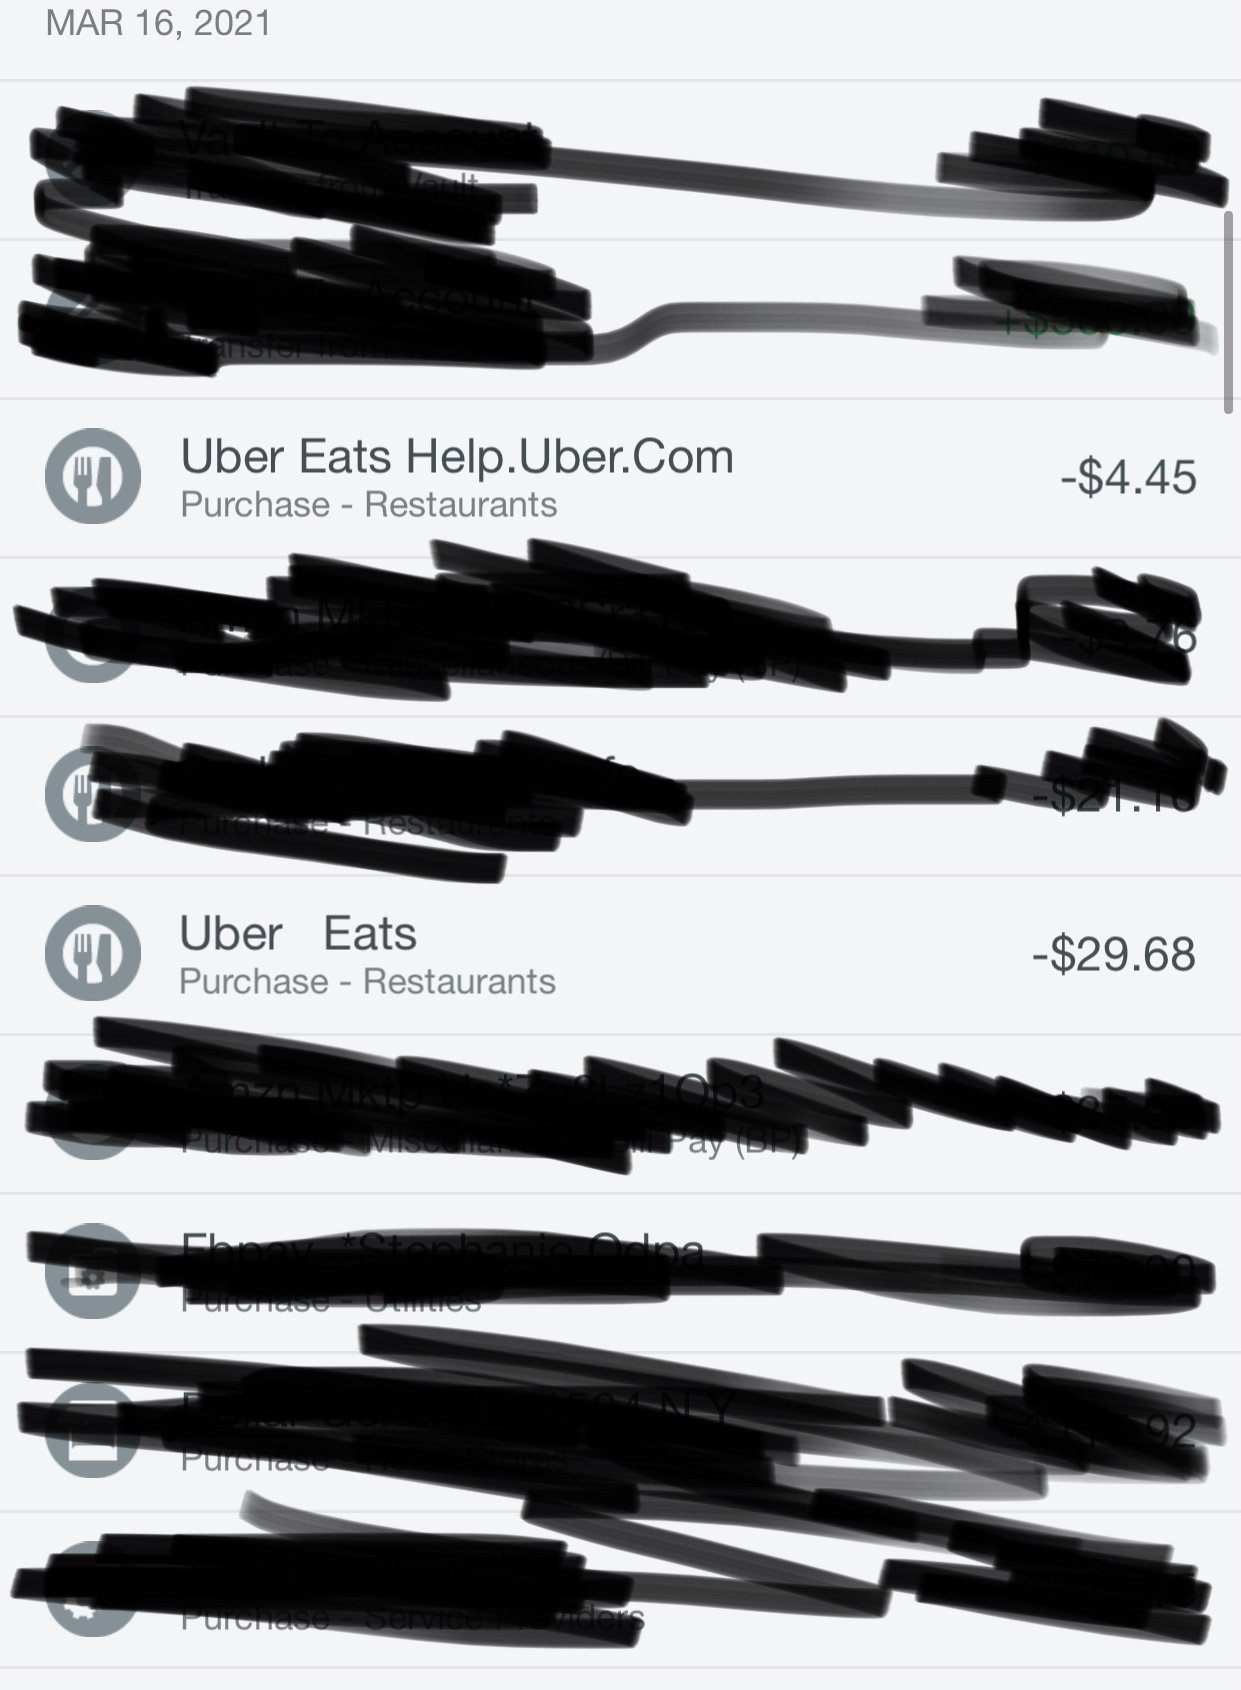 Uber Eats complaint Erroneous charges placed on my debit card